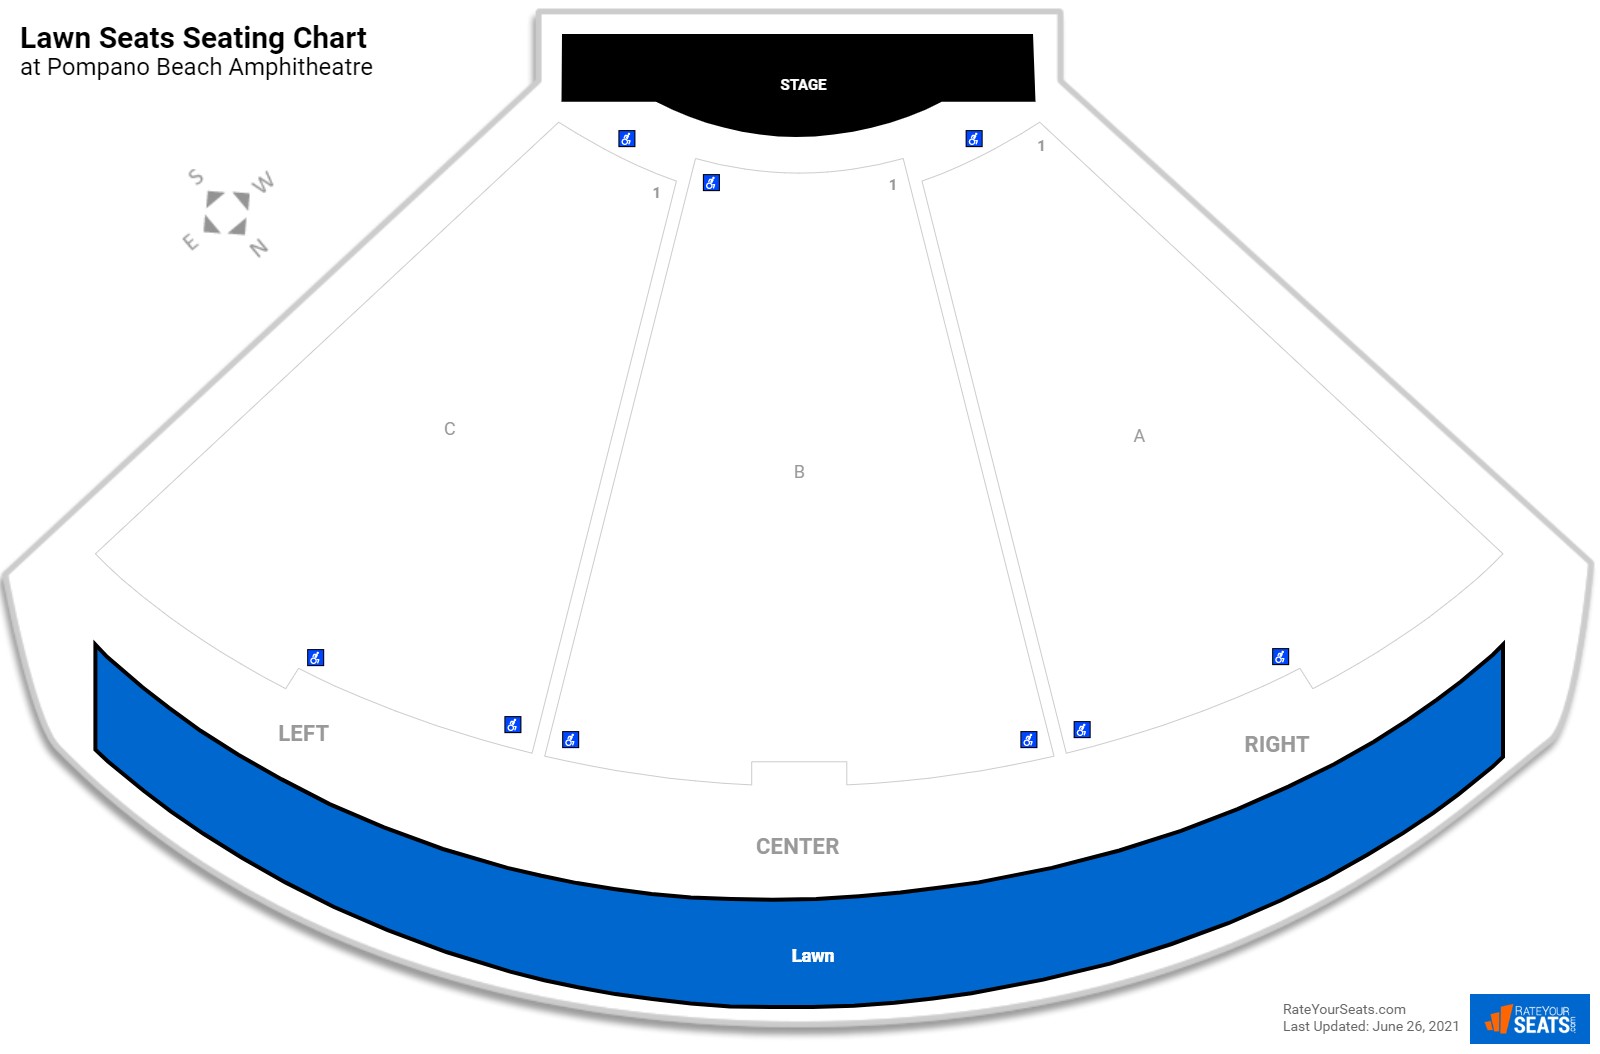 Concert Lawn Seats Seating Chart at Pompano Beach Amphitheatre